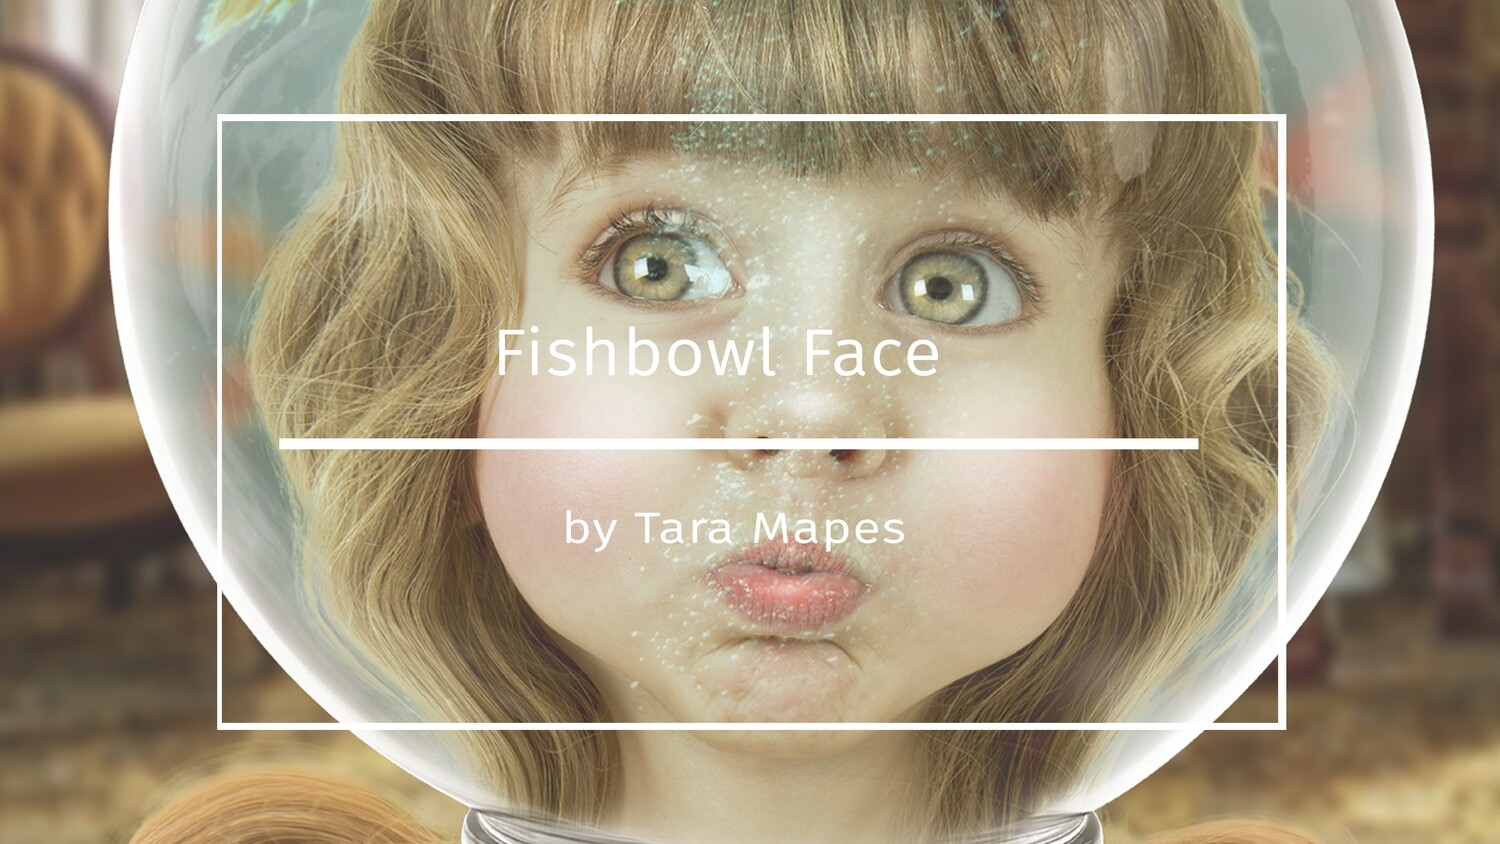 Fishbowl Face Photoshop Tutorial : How To Extract and Blend Your Subject into Fishbowl Face Layered PSD Background in Photoshop by Tara Mapes